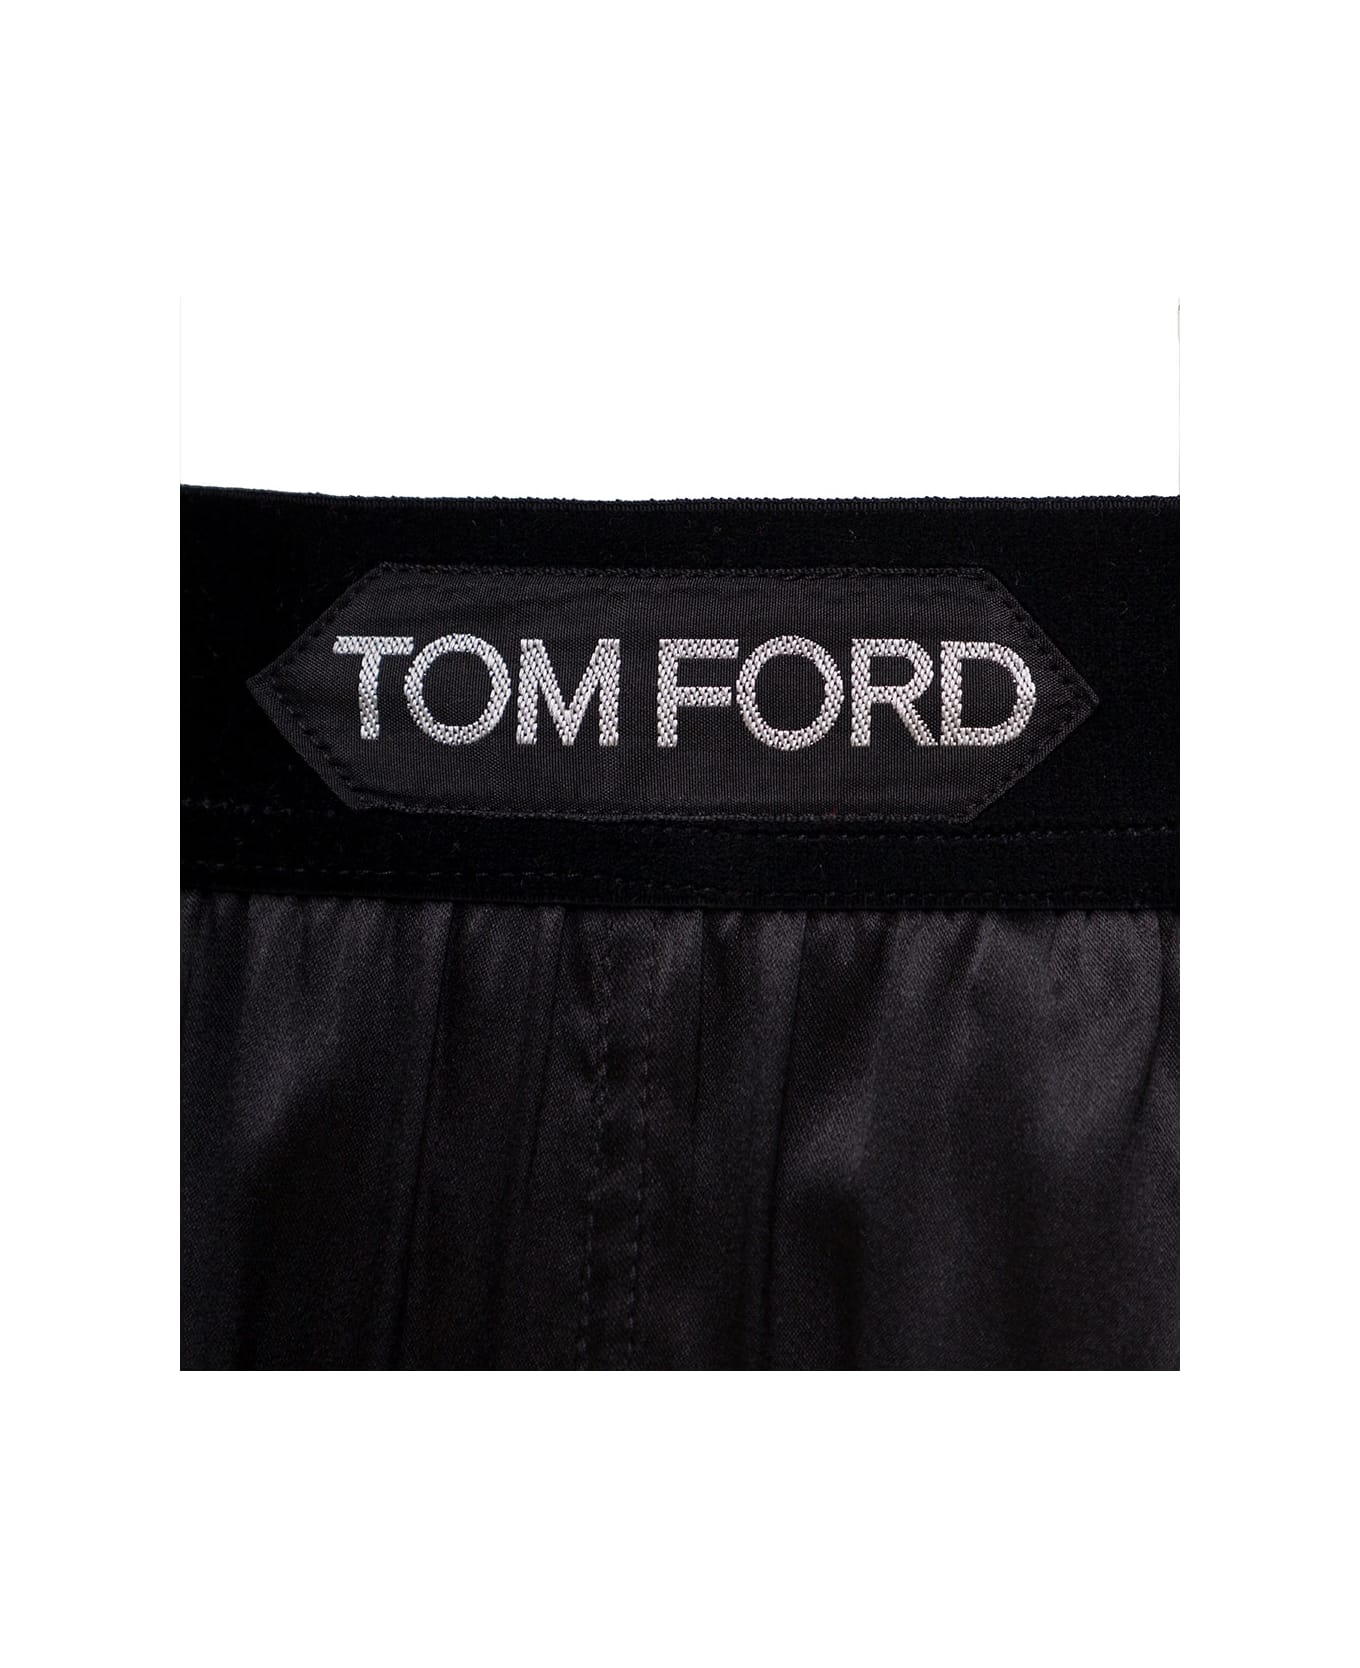 Tom Ford Black Loose Pants With Logo In Stretch Silk Woman Tom Ford - Black